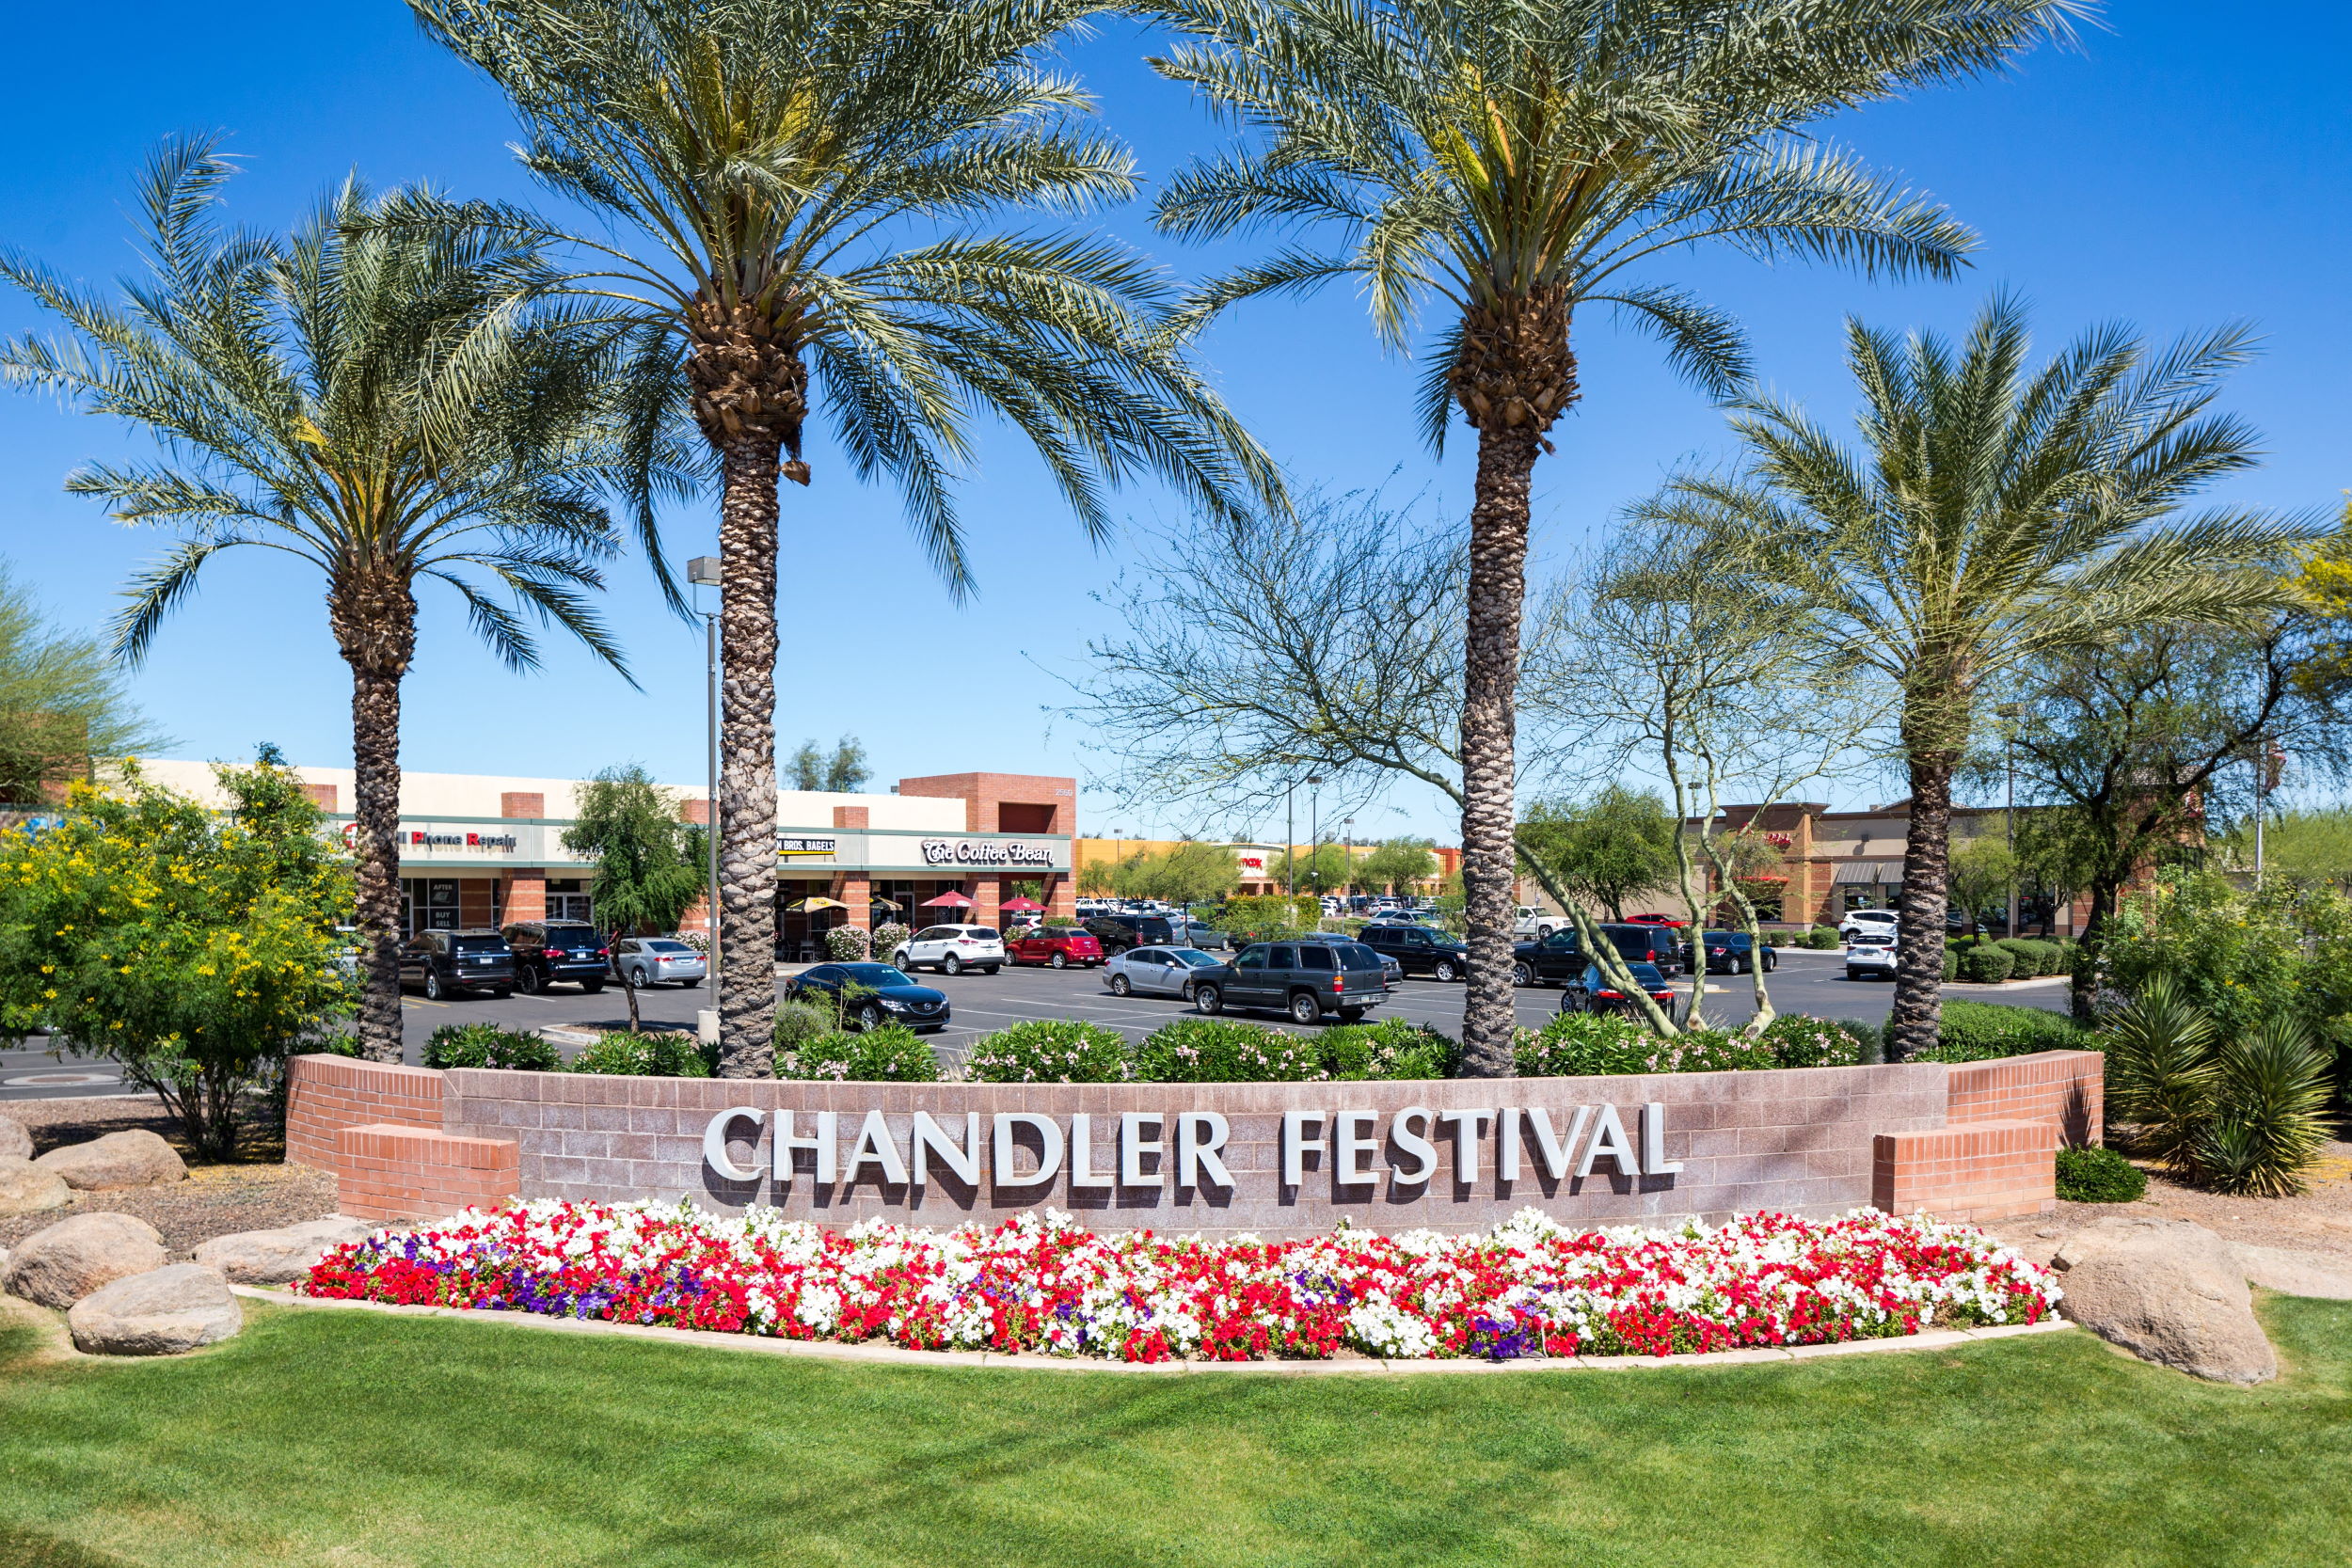 About Chandler Festival